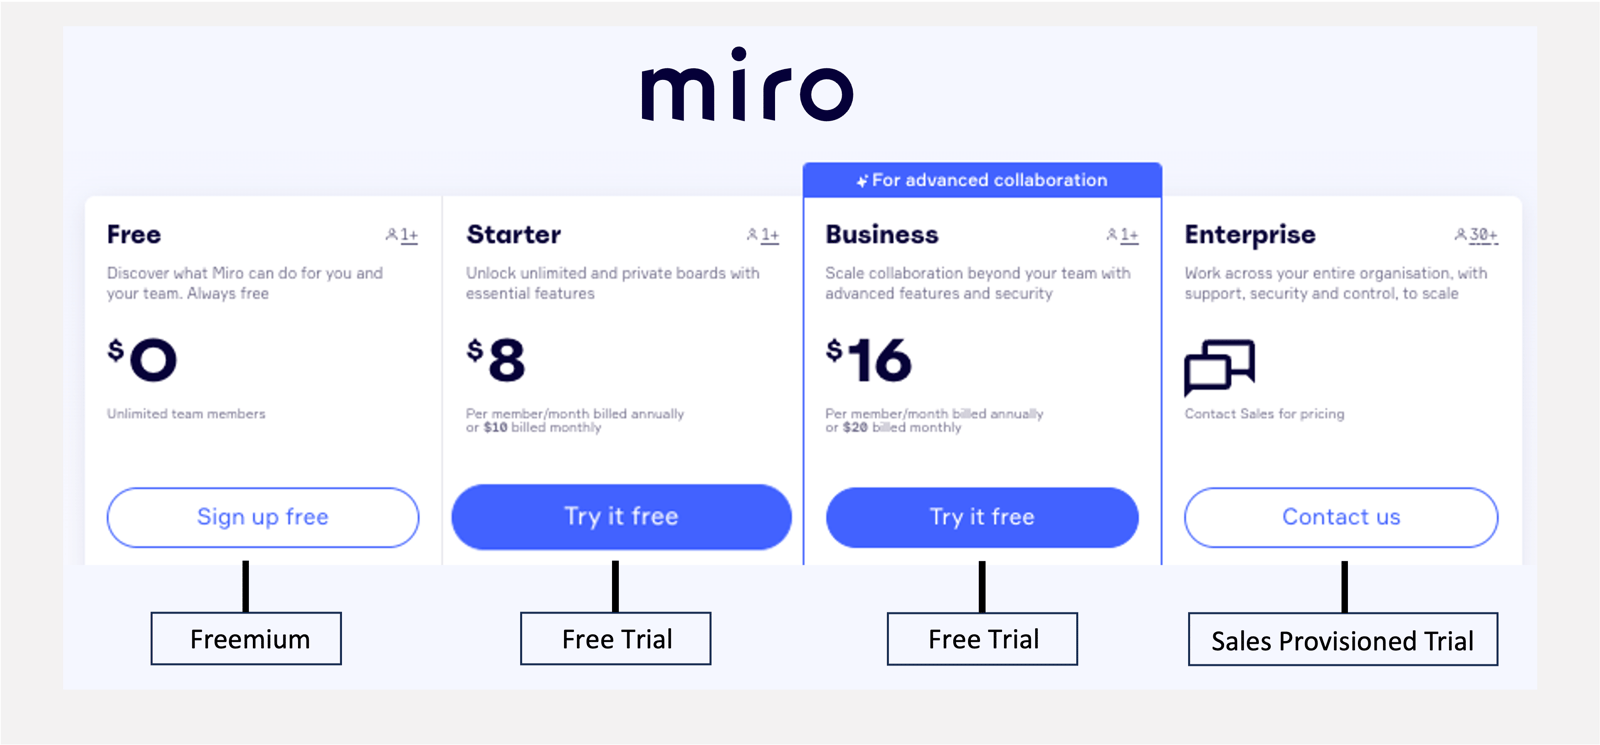 miro pricing pages